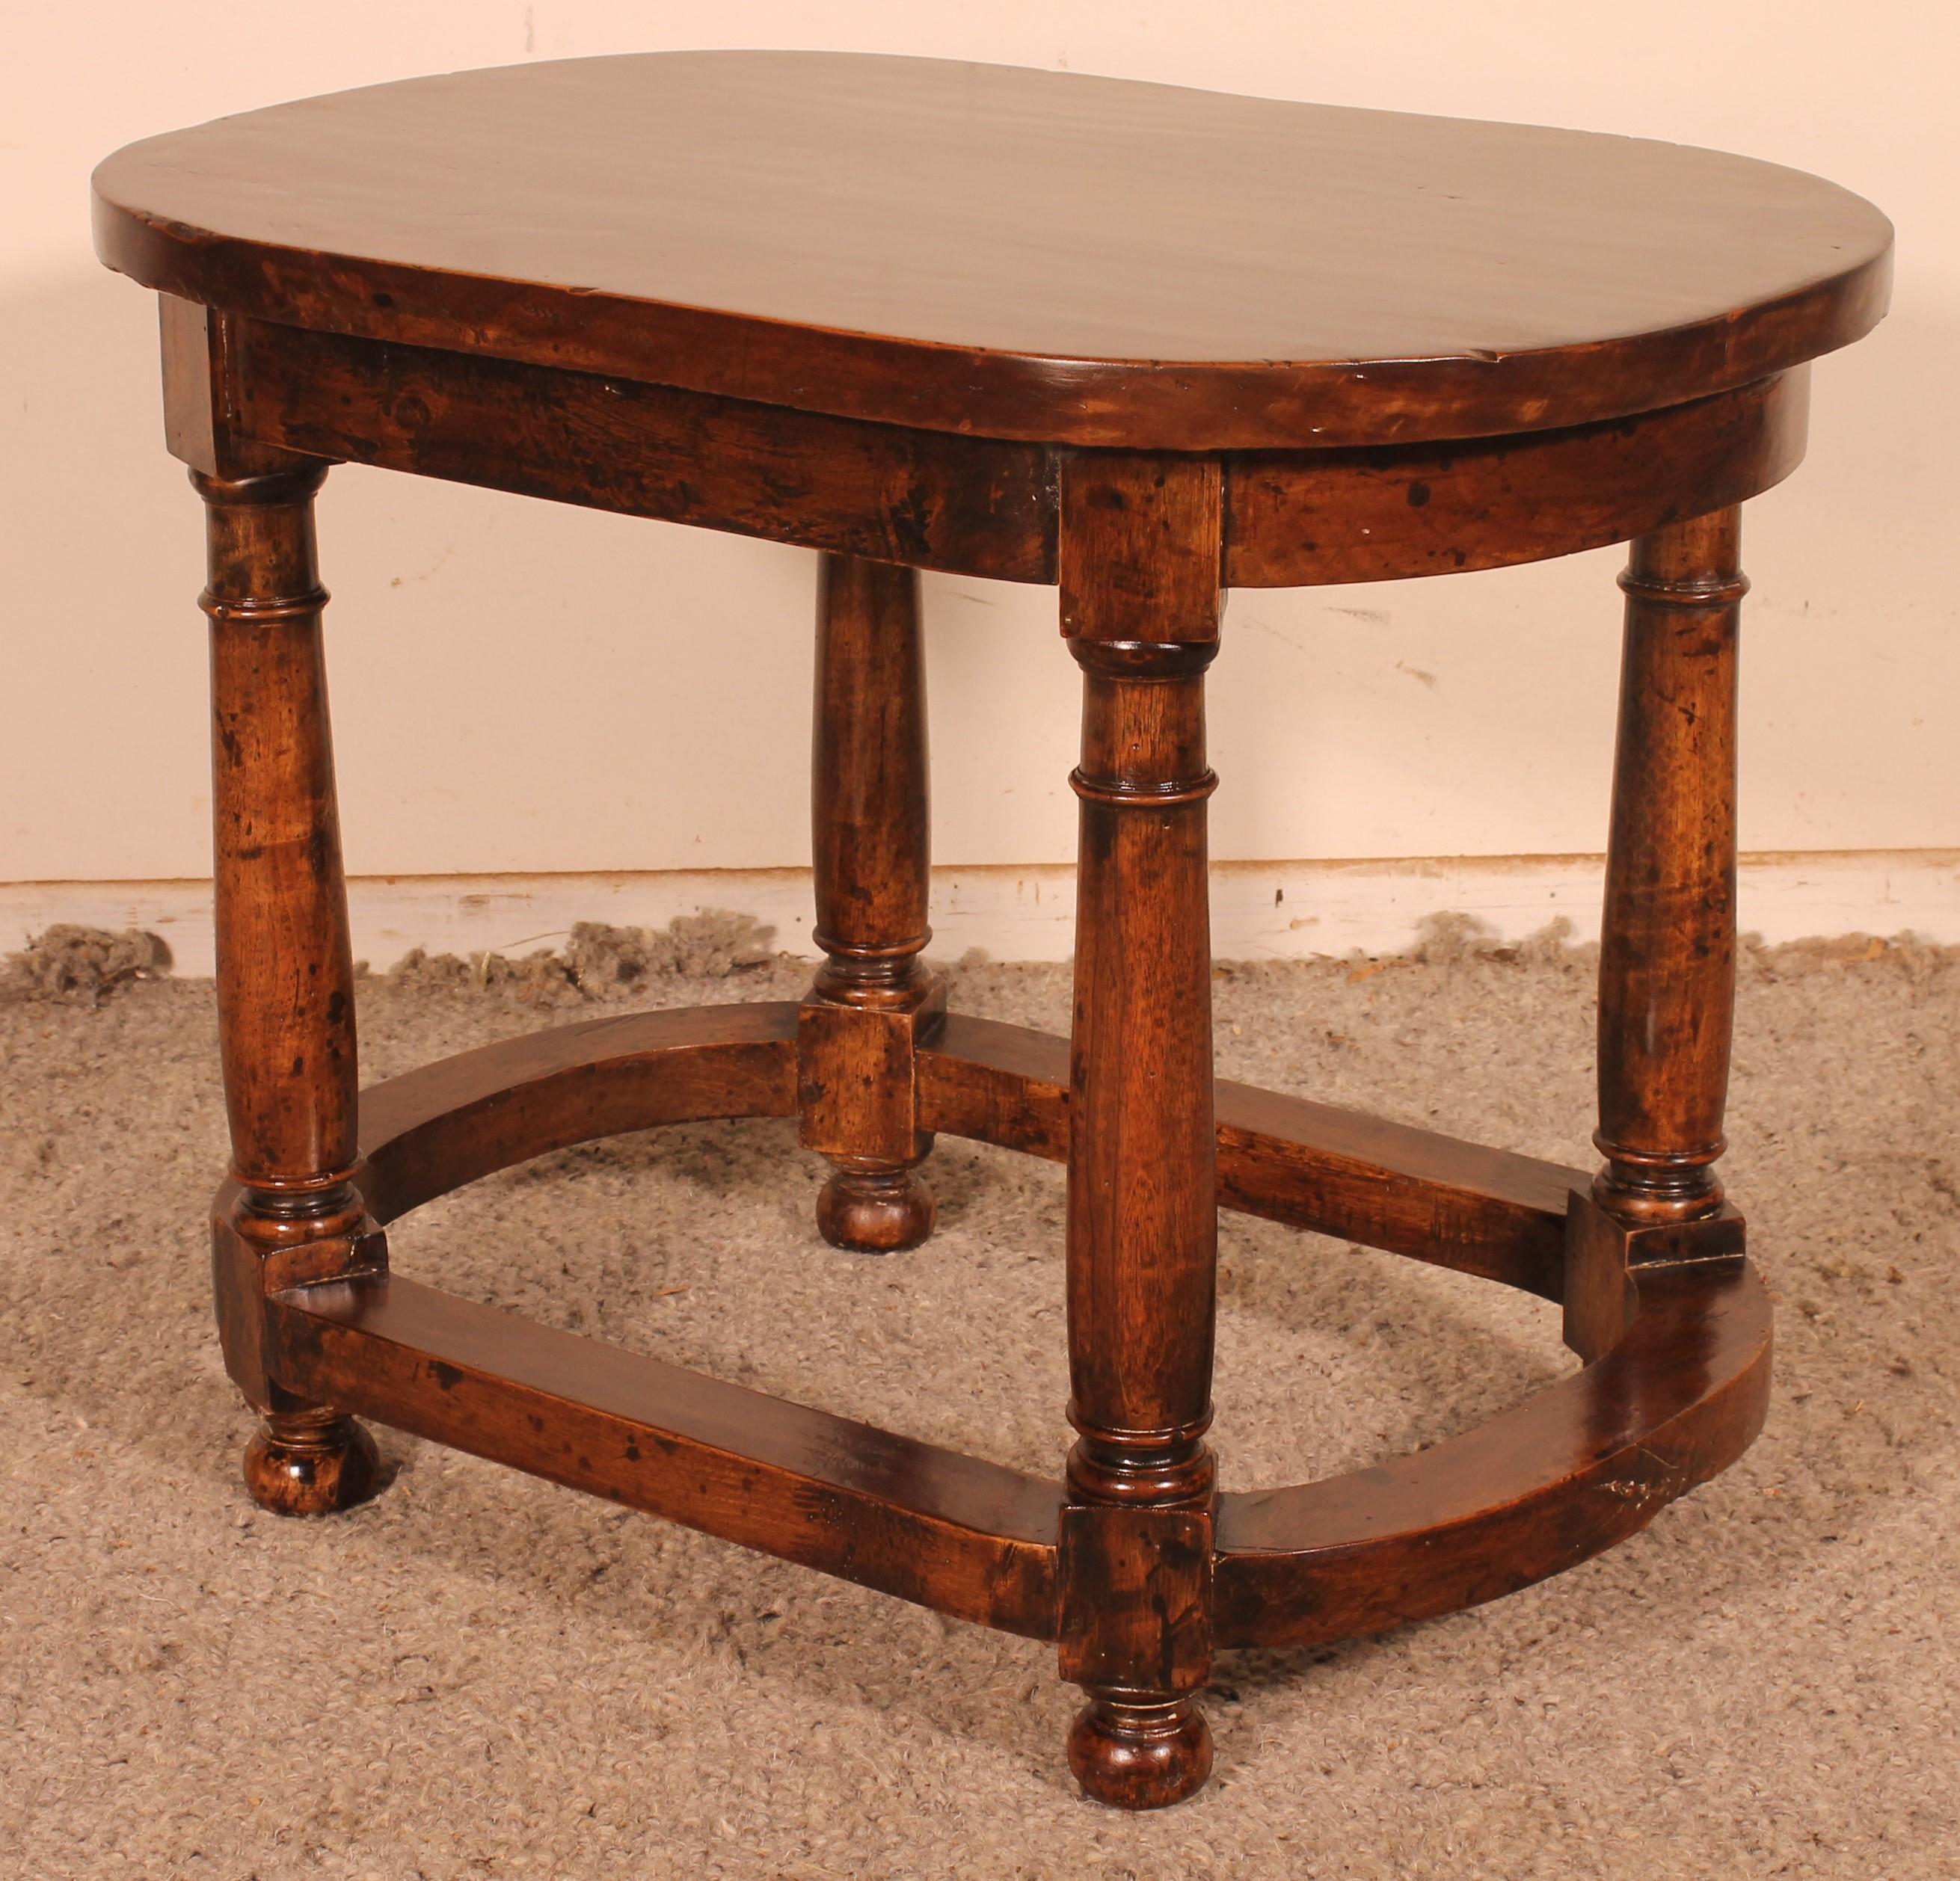 Henri II Table in Walnut from the 19th Century 3